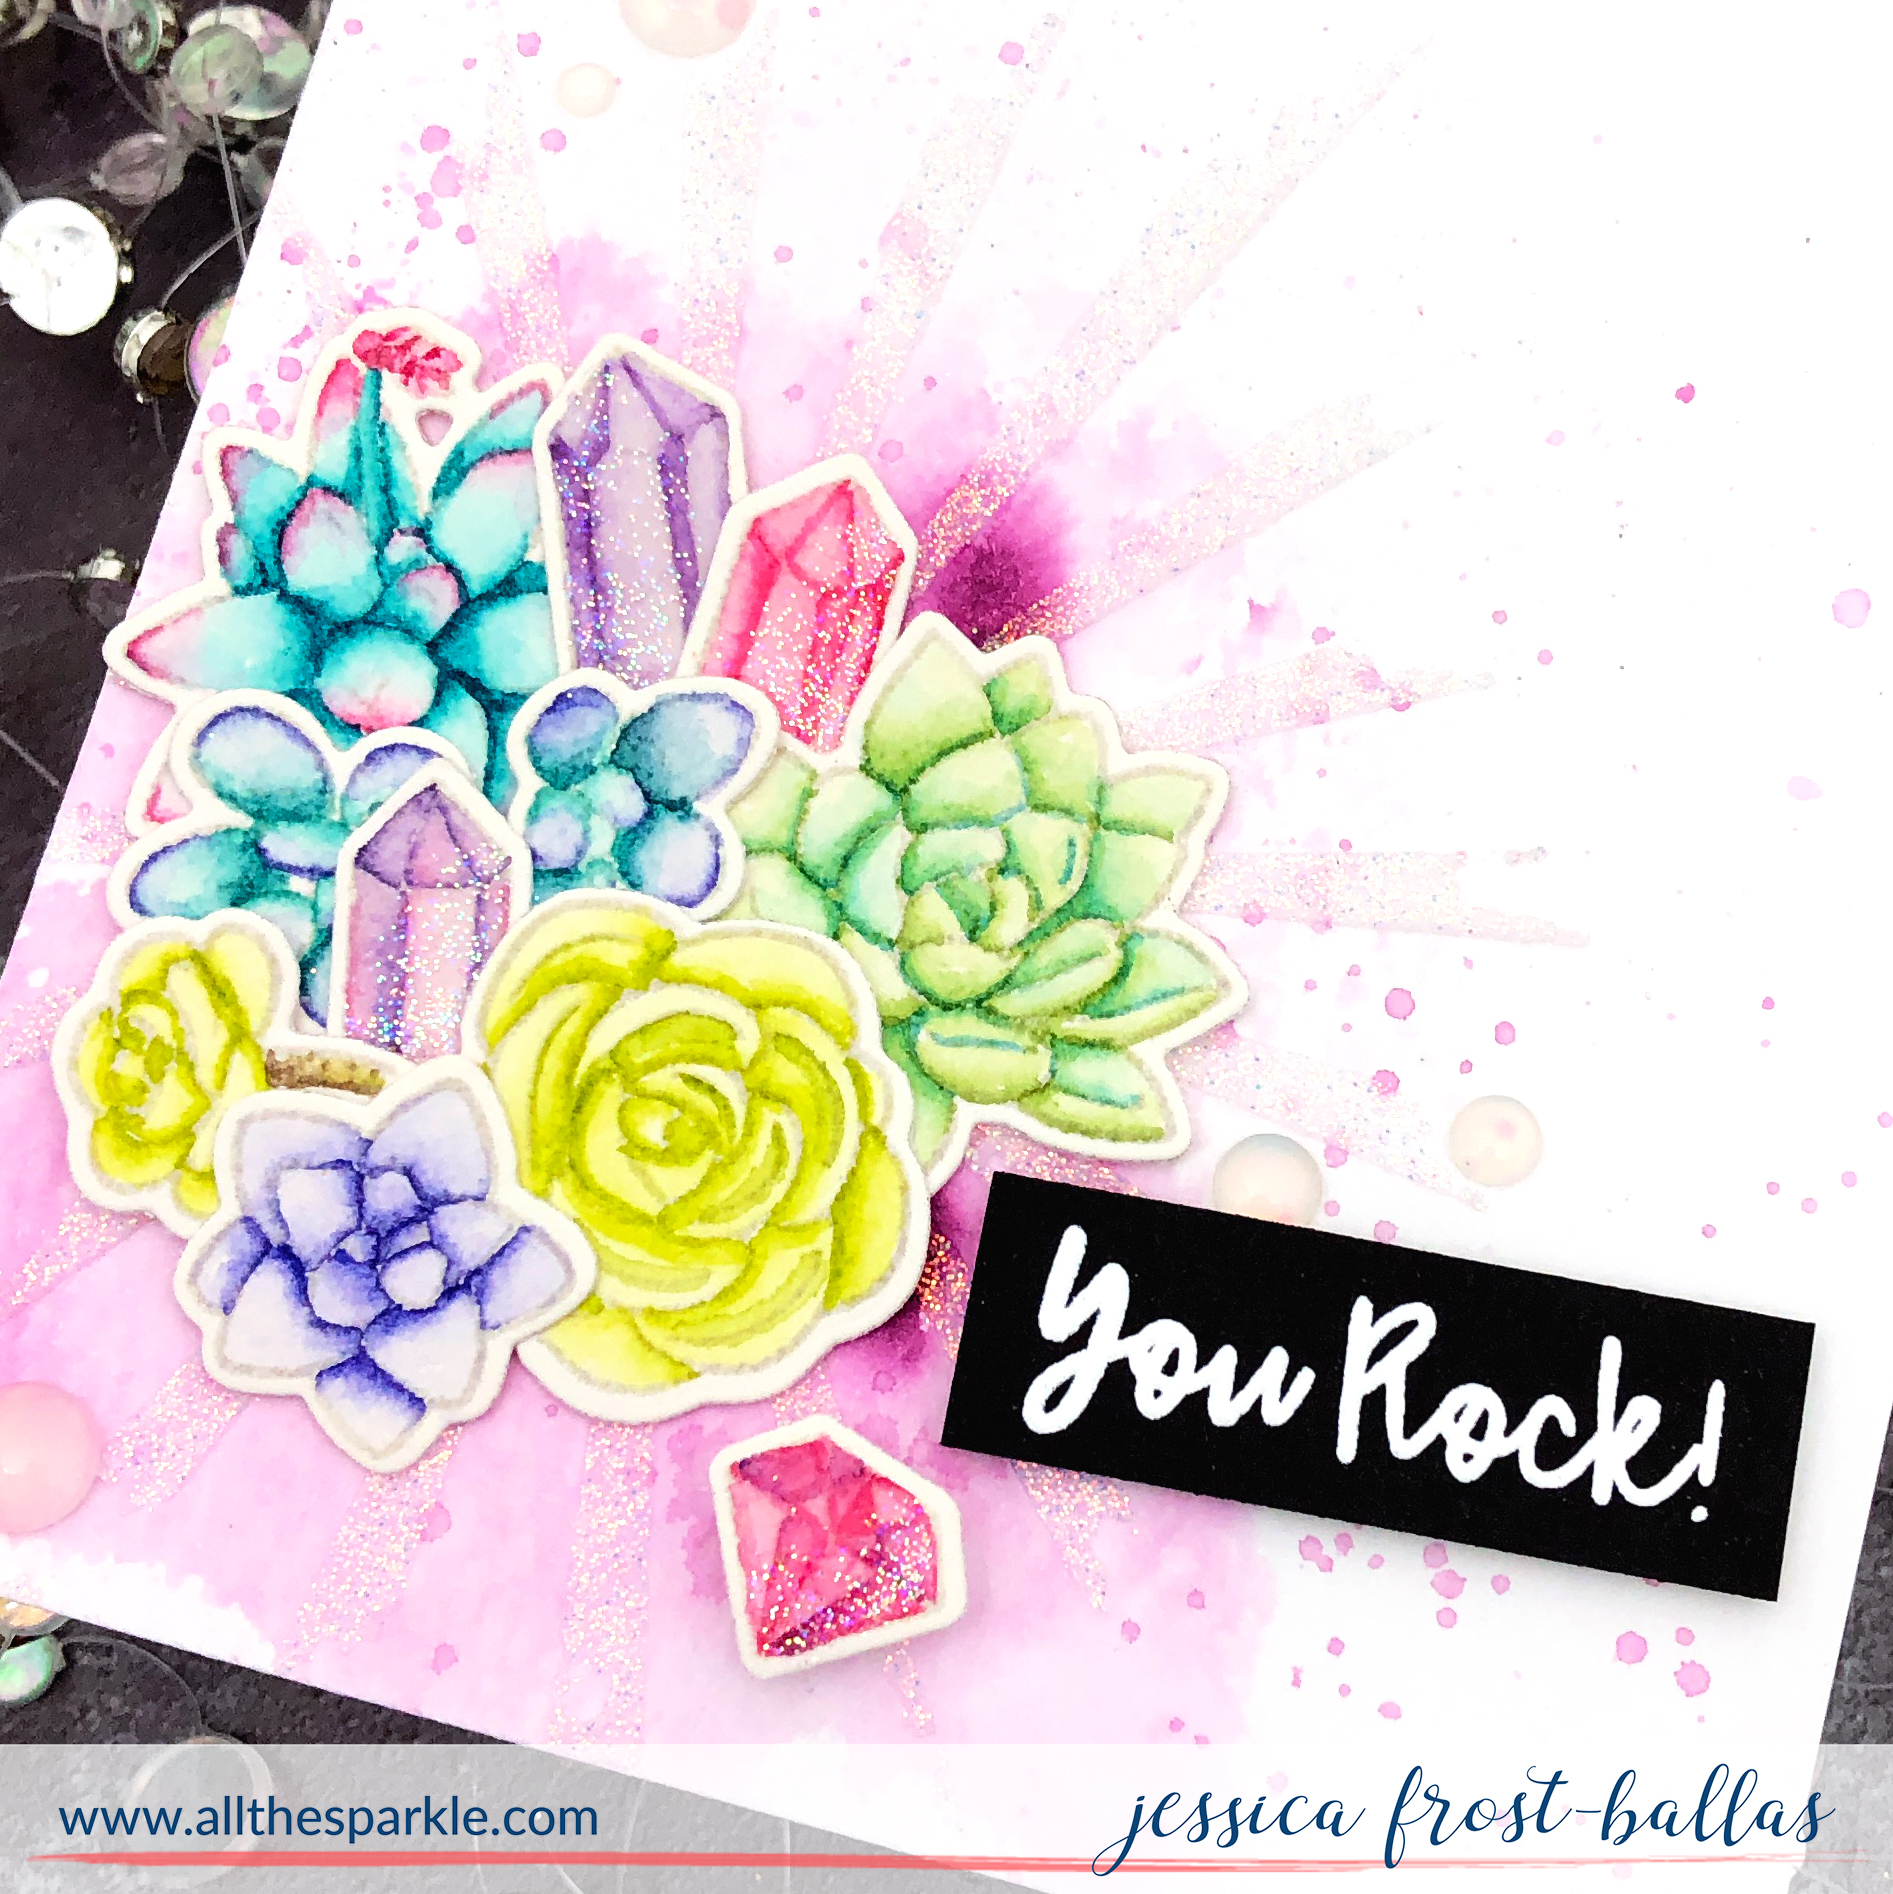 You Rock by Jessica Frost-Ballas for Trinity Stamps